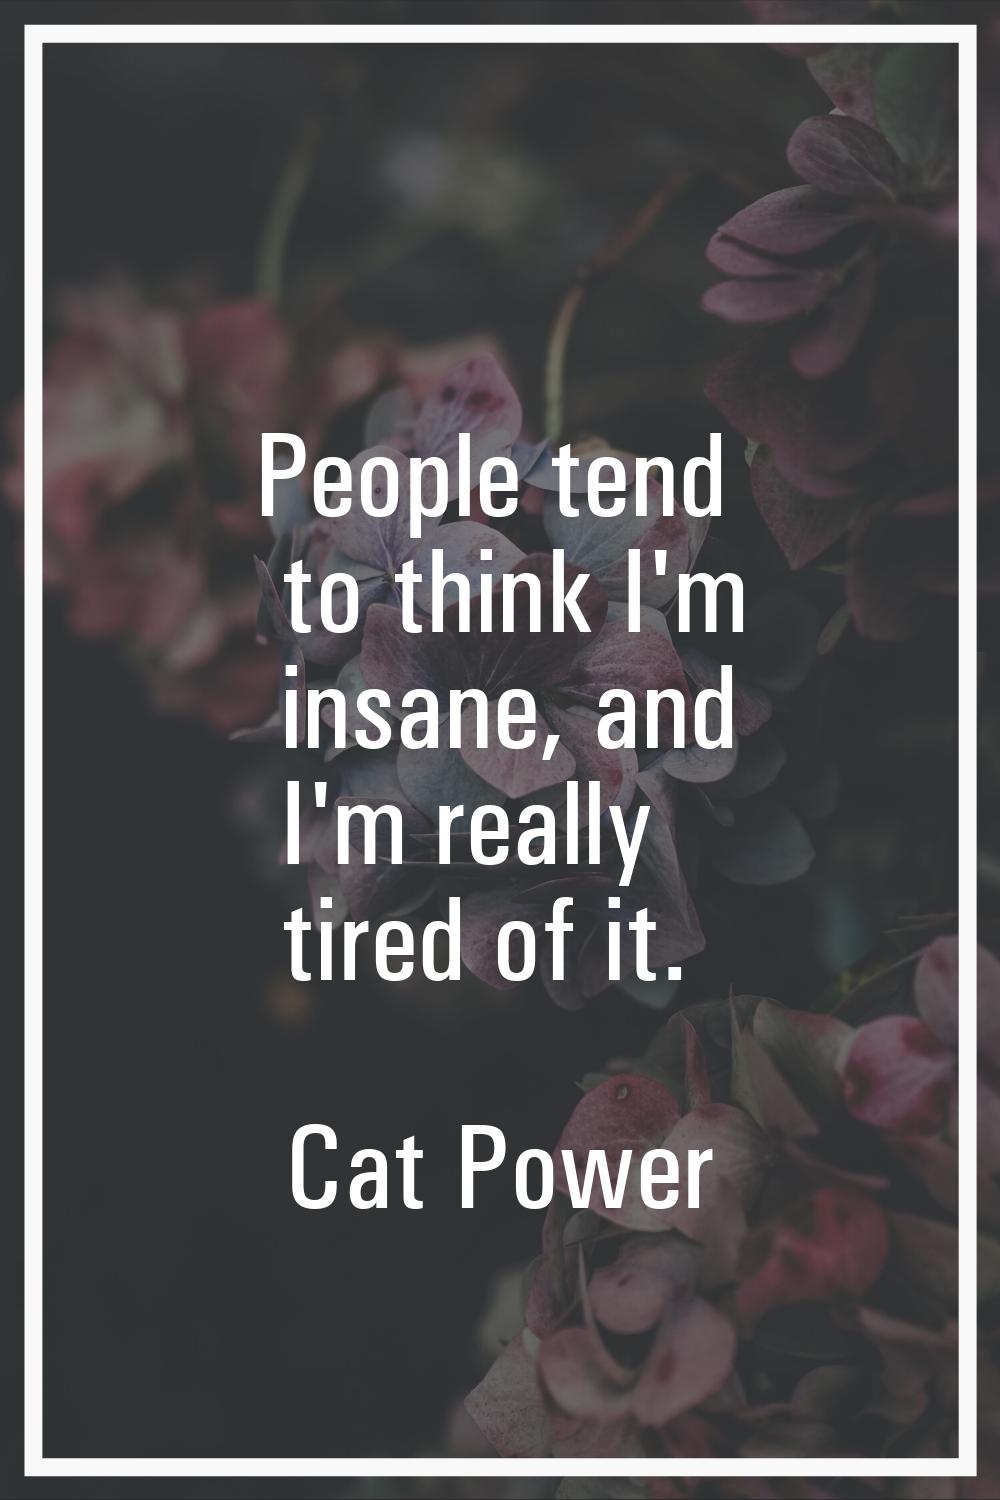 People tend to think I'm insane, and I'm really tired of it.